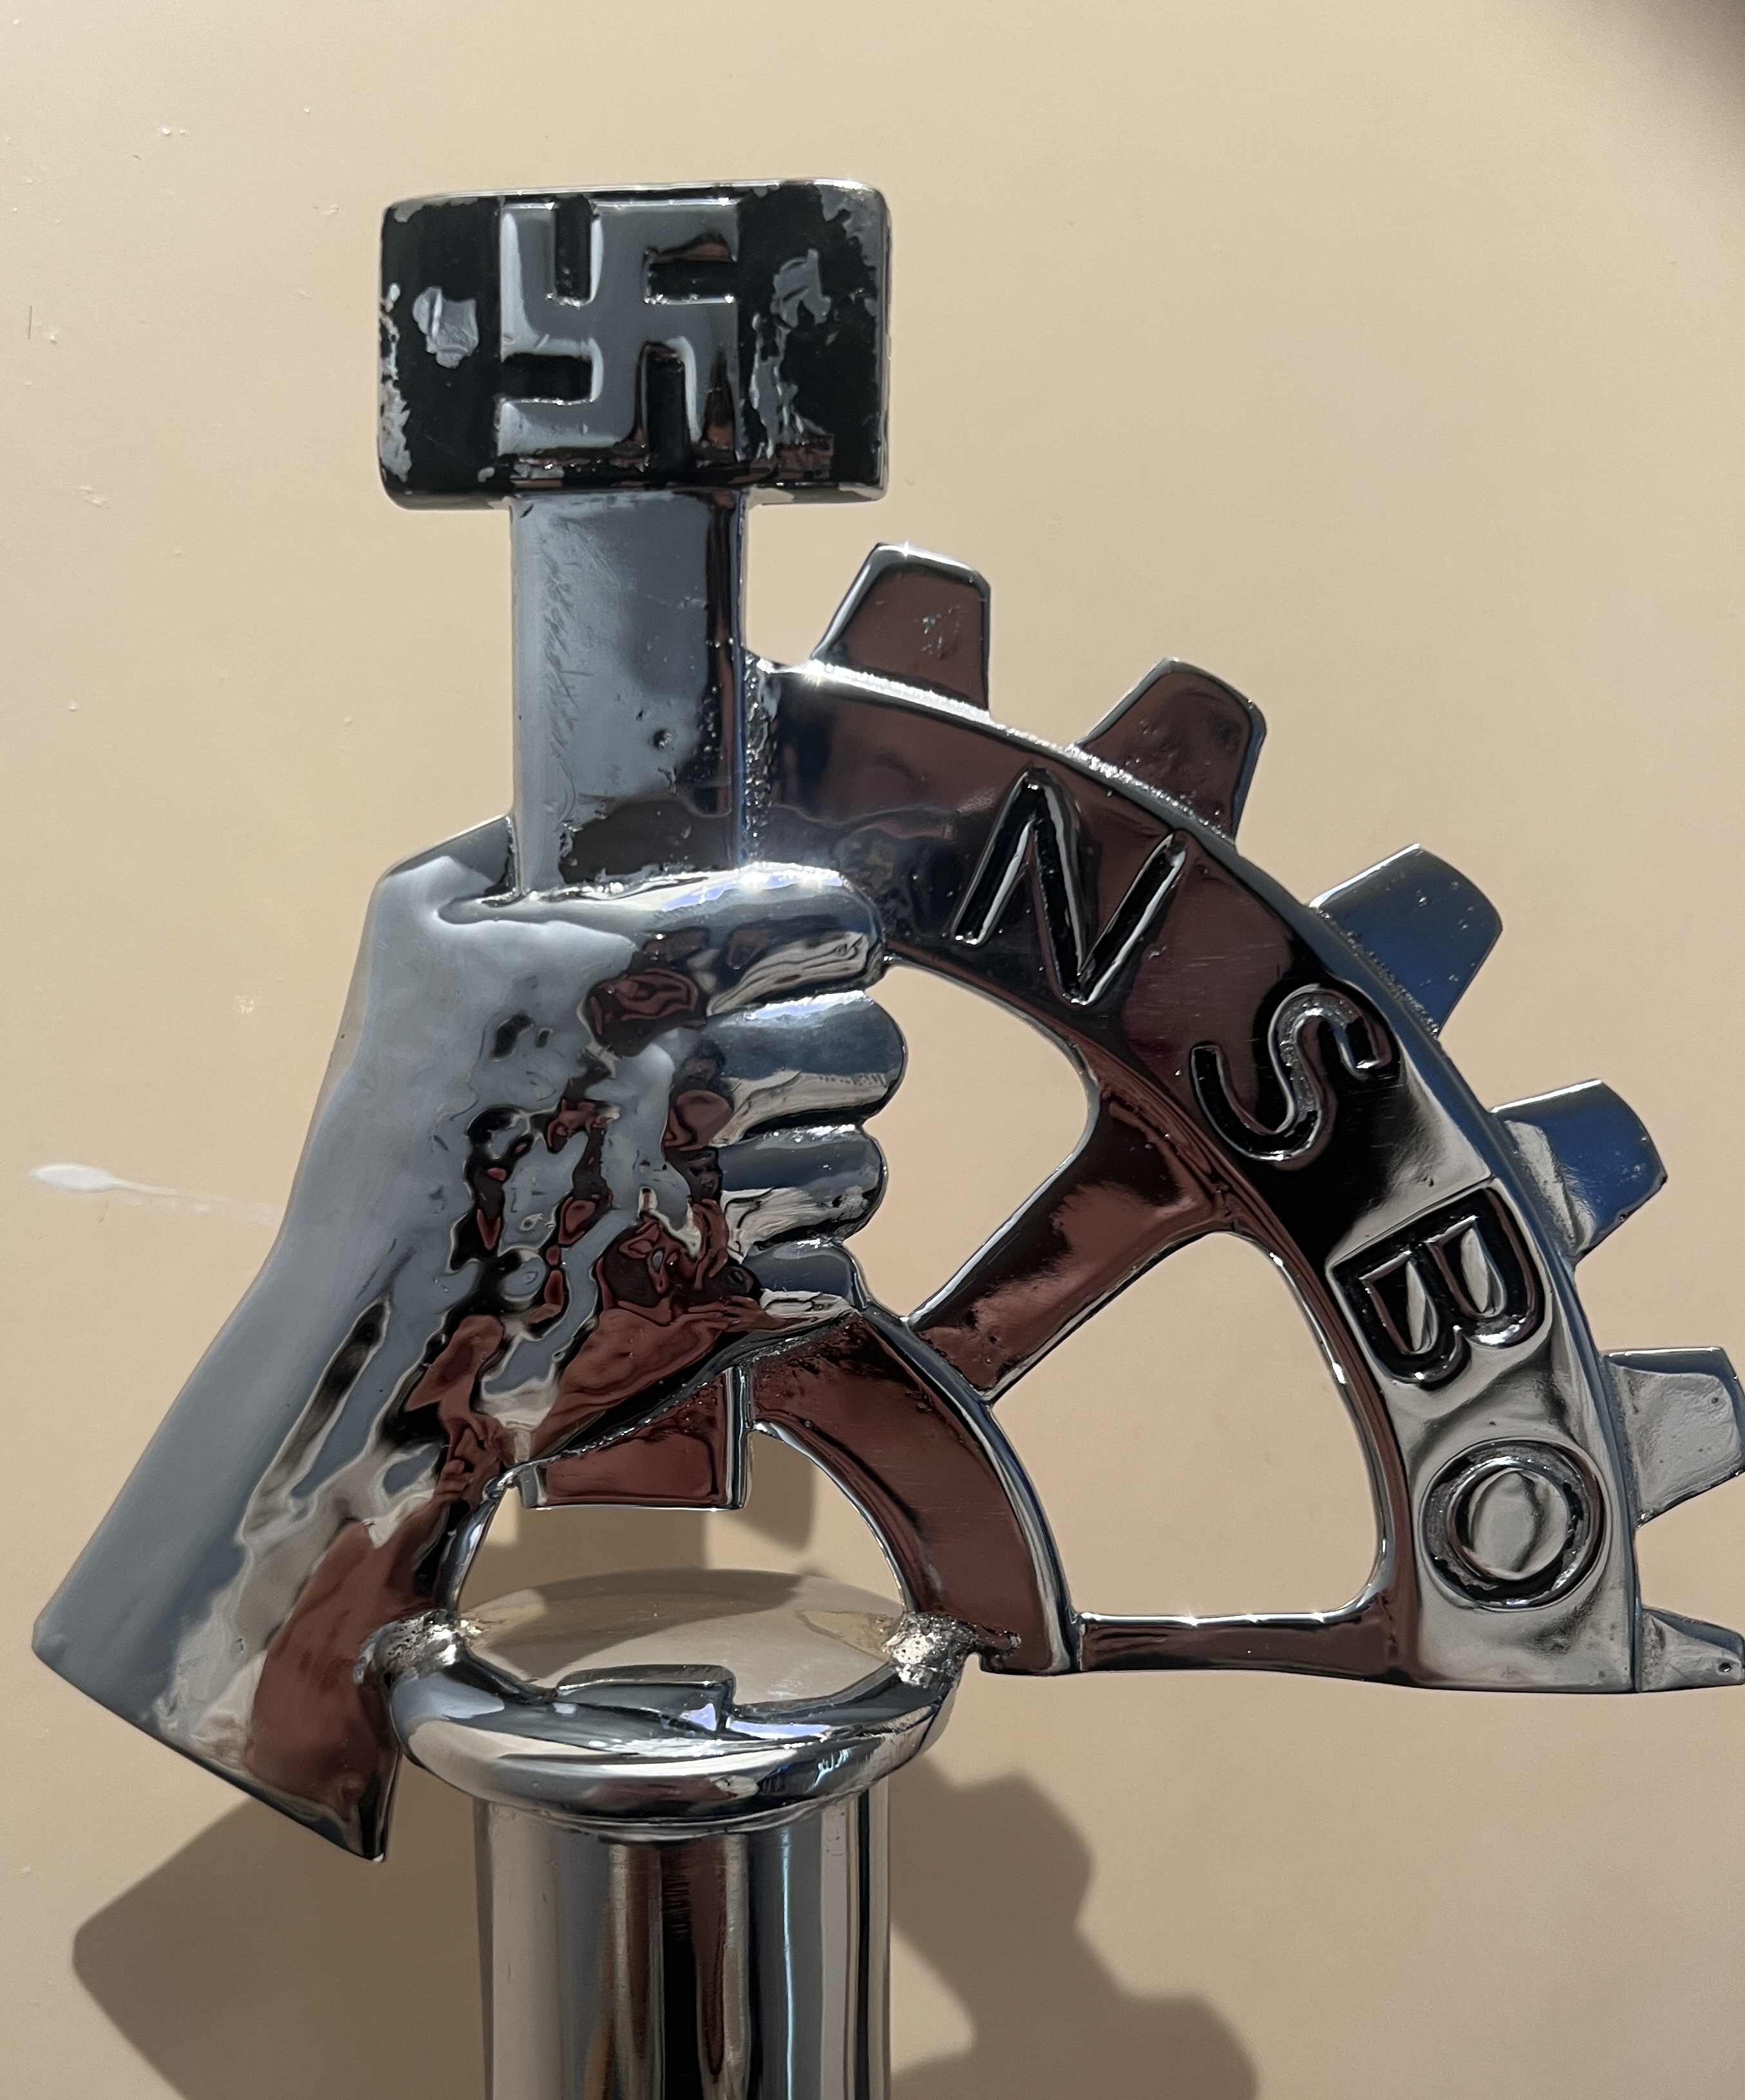 bright metal, hand holding hammer and swastika, quarter of cog and NSBO, obvious worker related item